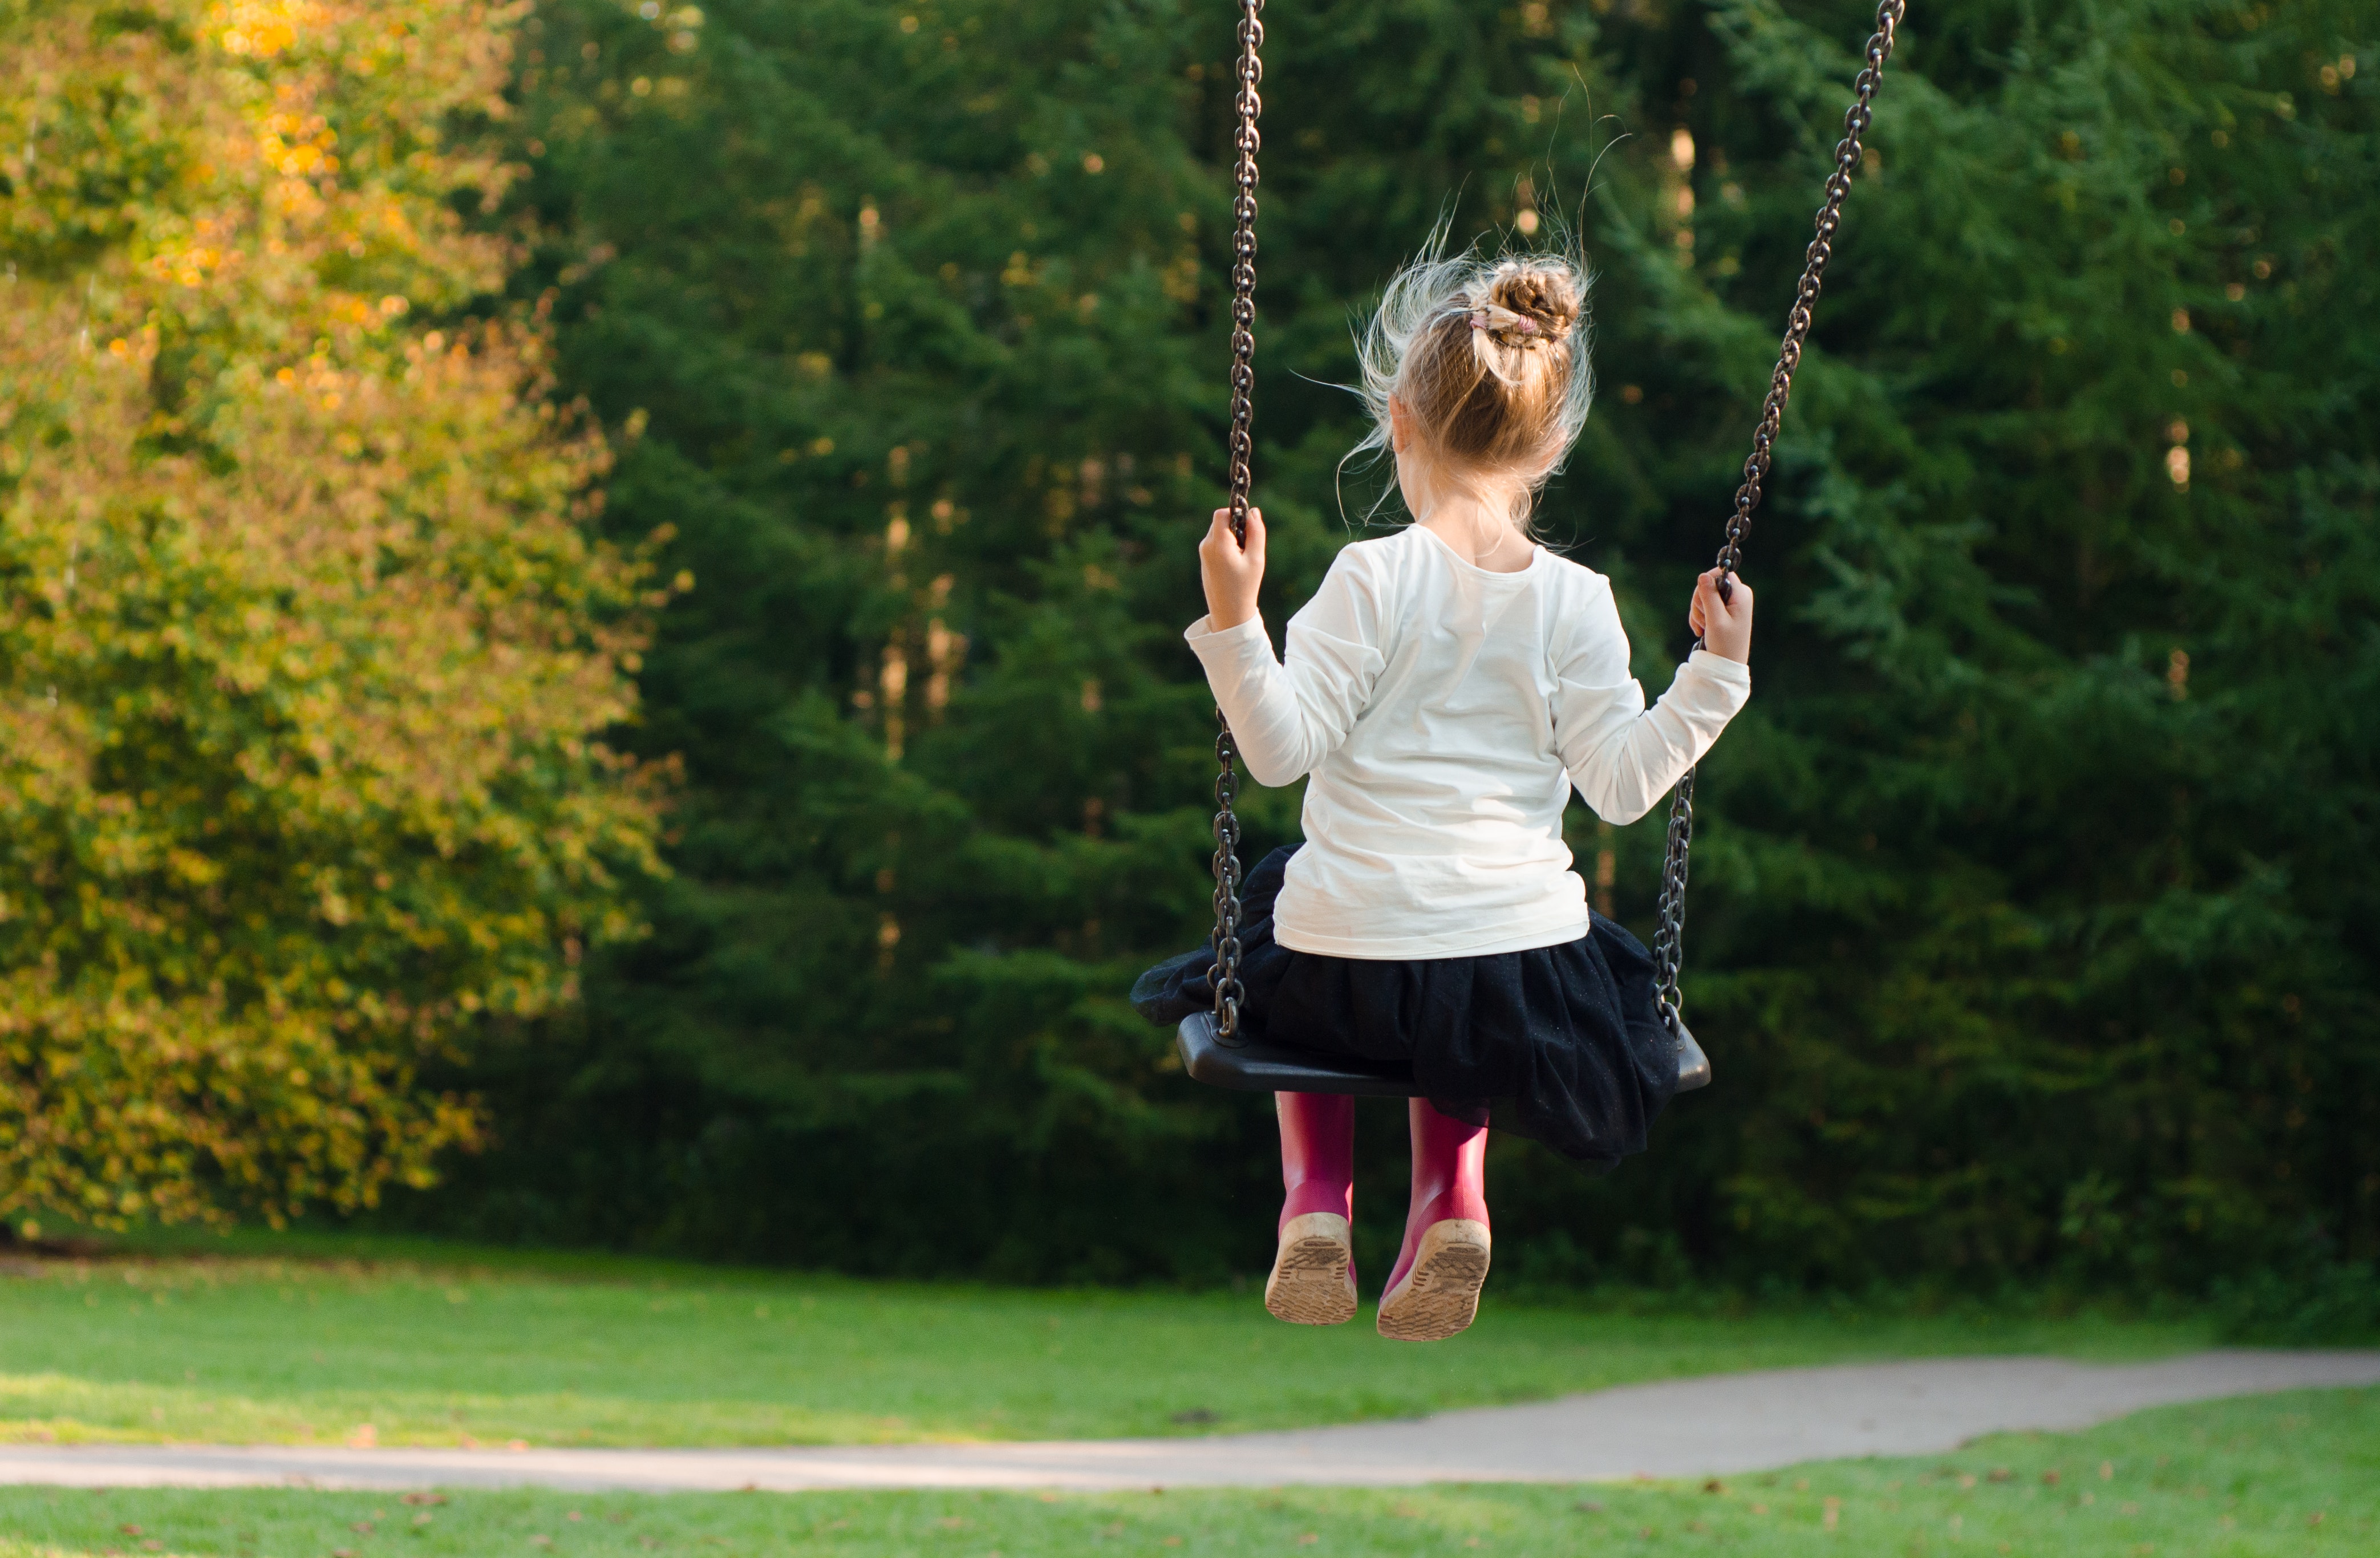 Girl in White Long Sleeve Shirt and Black Skirt Sitting on Swing during Day Time, Child, Girl, Kid, Person, HQ Photo